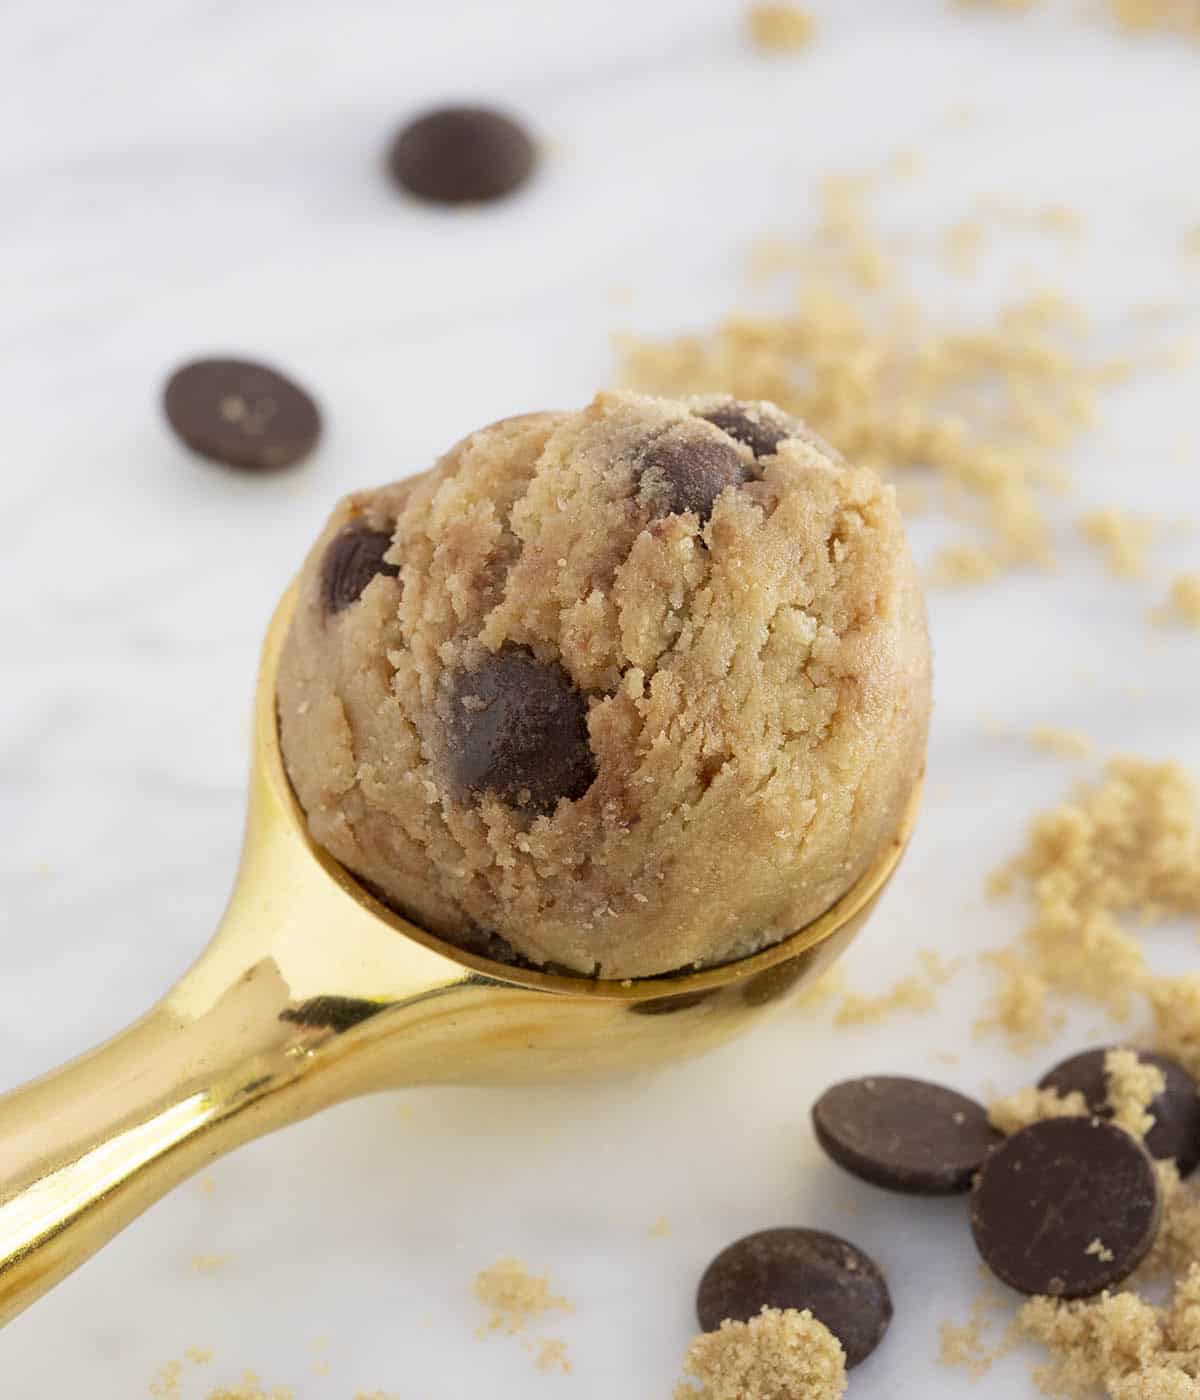 A gold ice cream scoop holding chocolate chip cookie dough with chocolate chips scattered around.